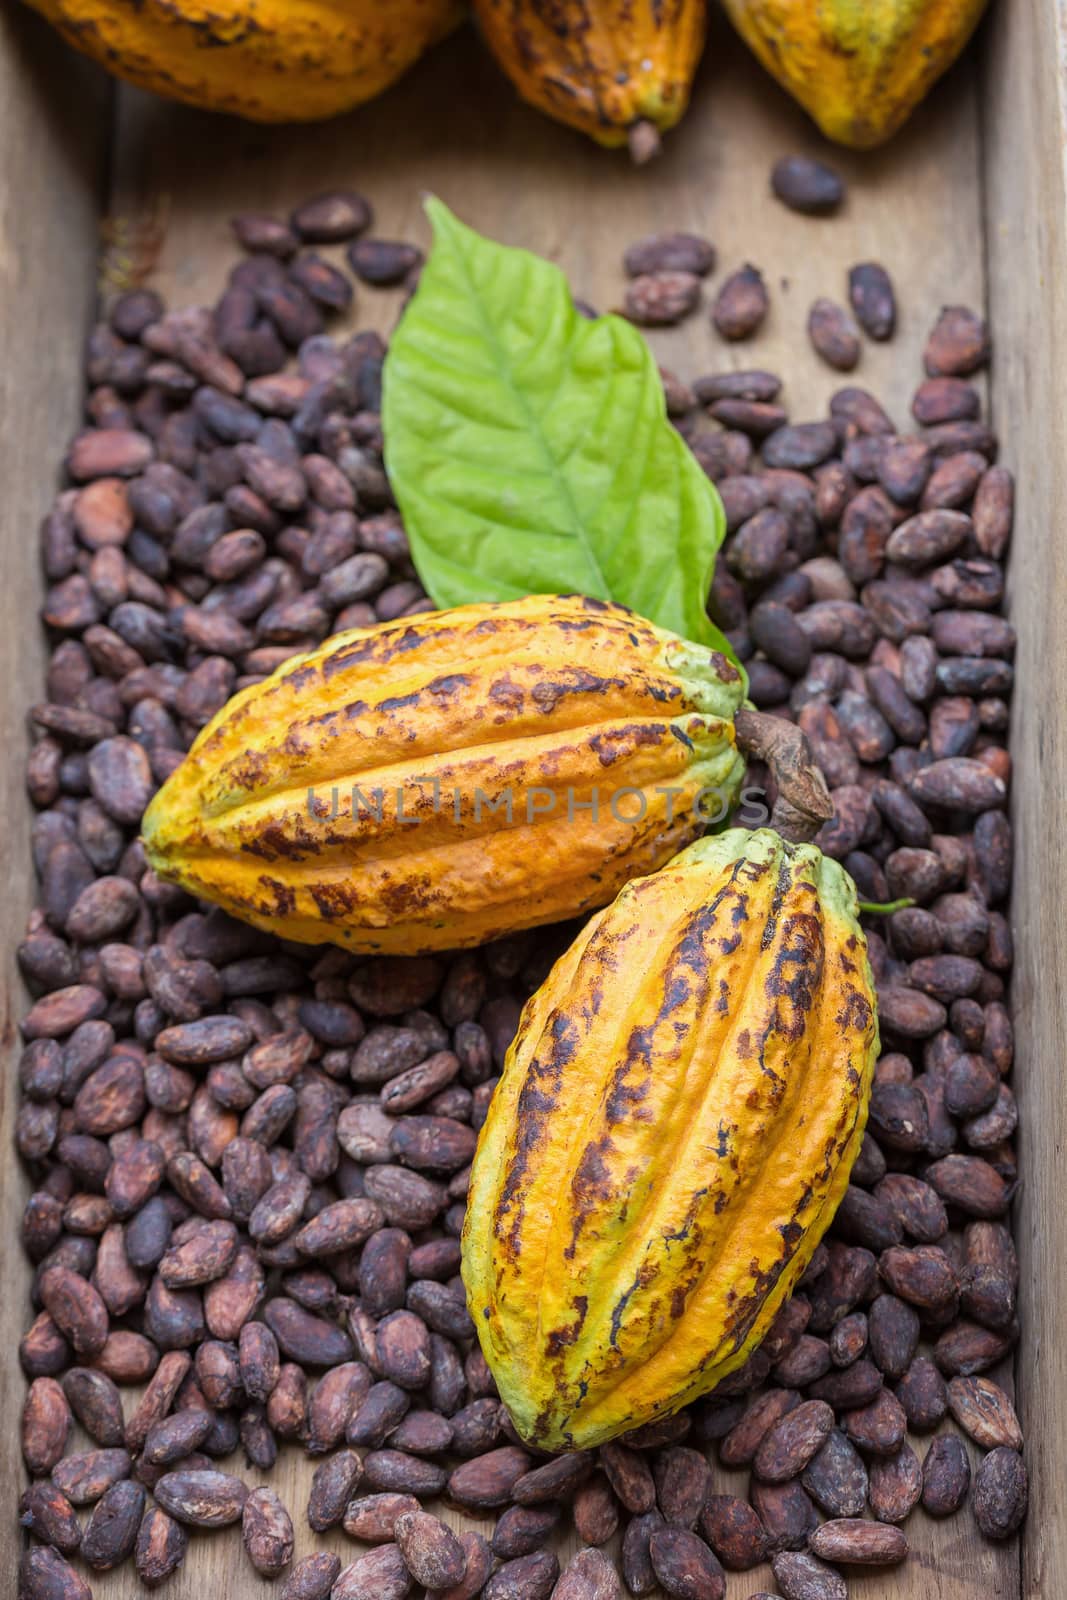 Ripe cocoa pod and beans setup on rustic wooden background by kaiskynet